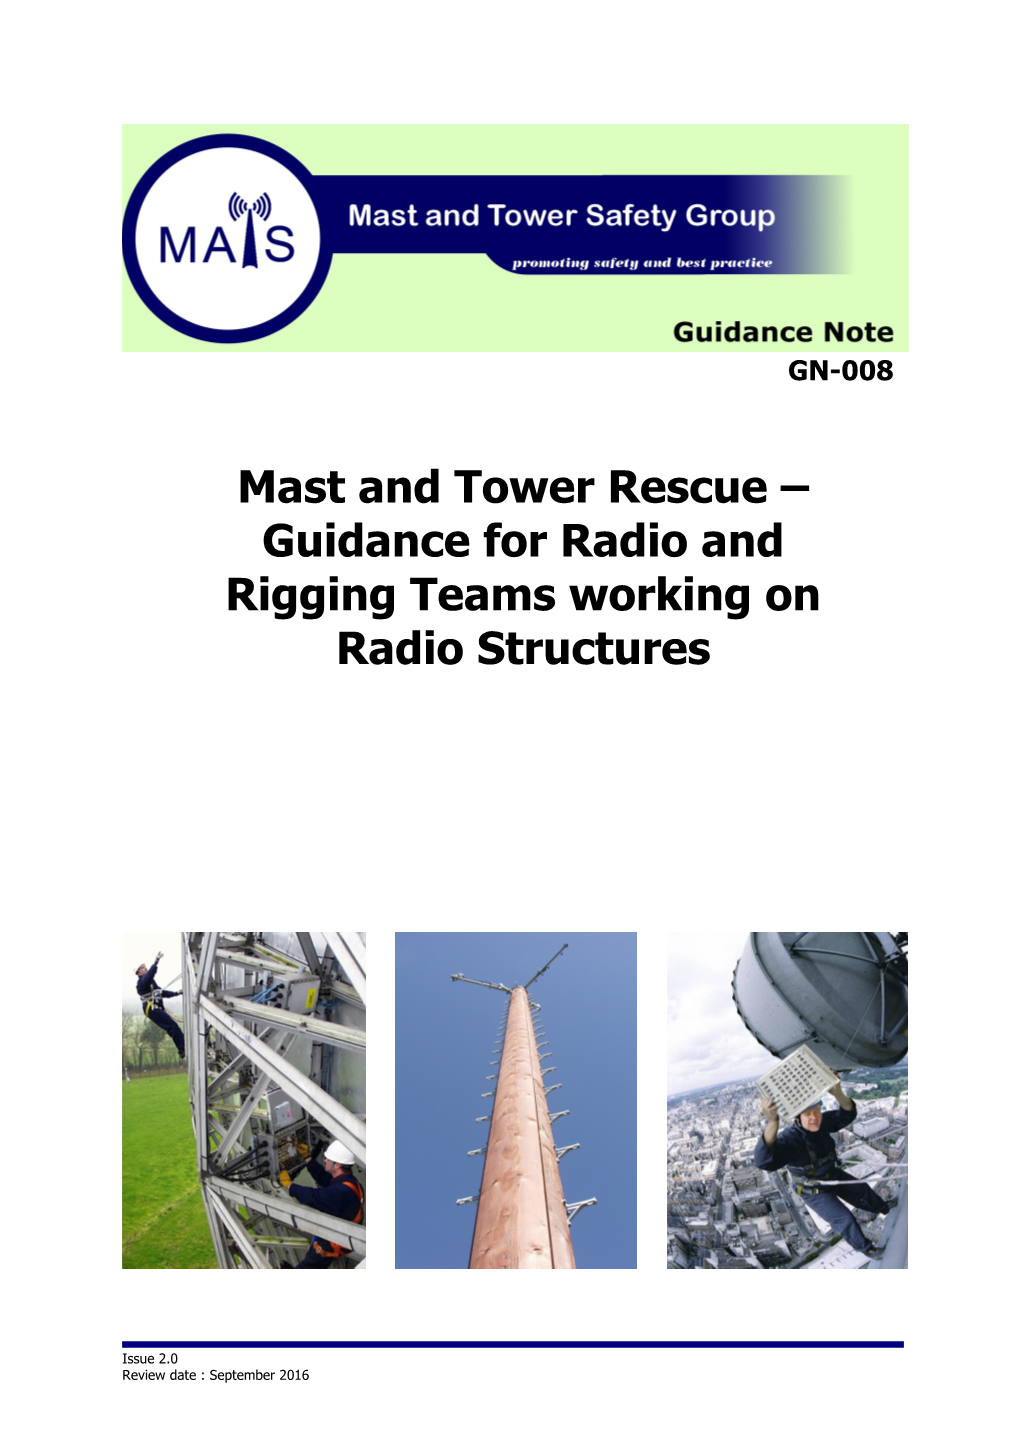 Mast and Tower Rescue Guidance for Radio and Rigging Teams Working on Radio Structures